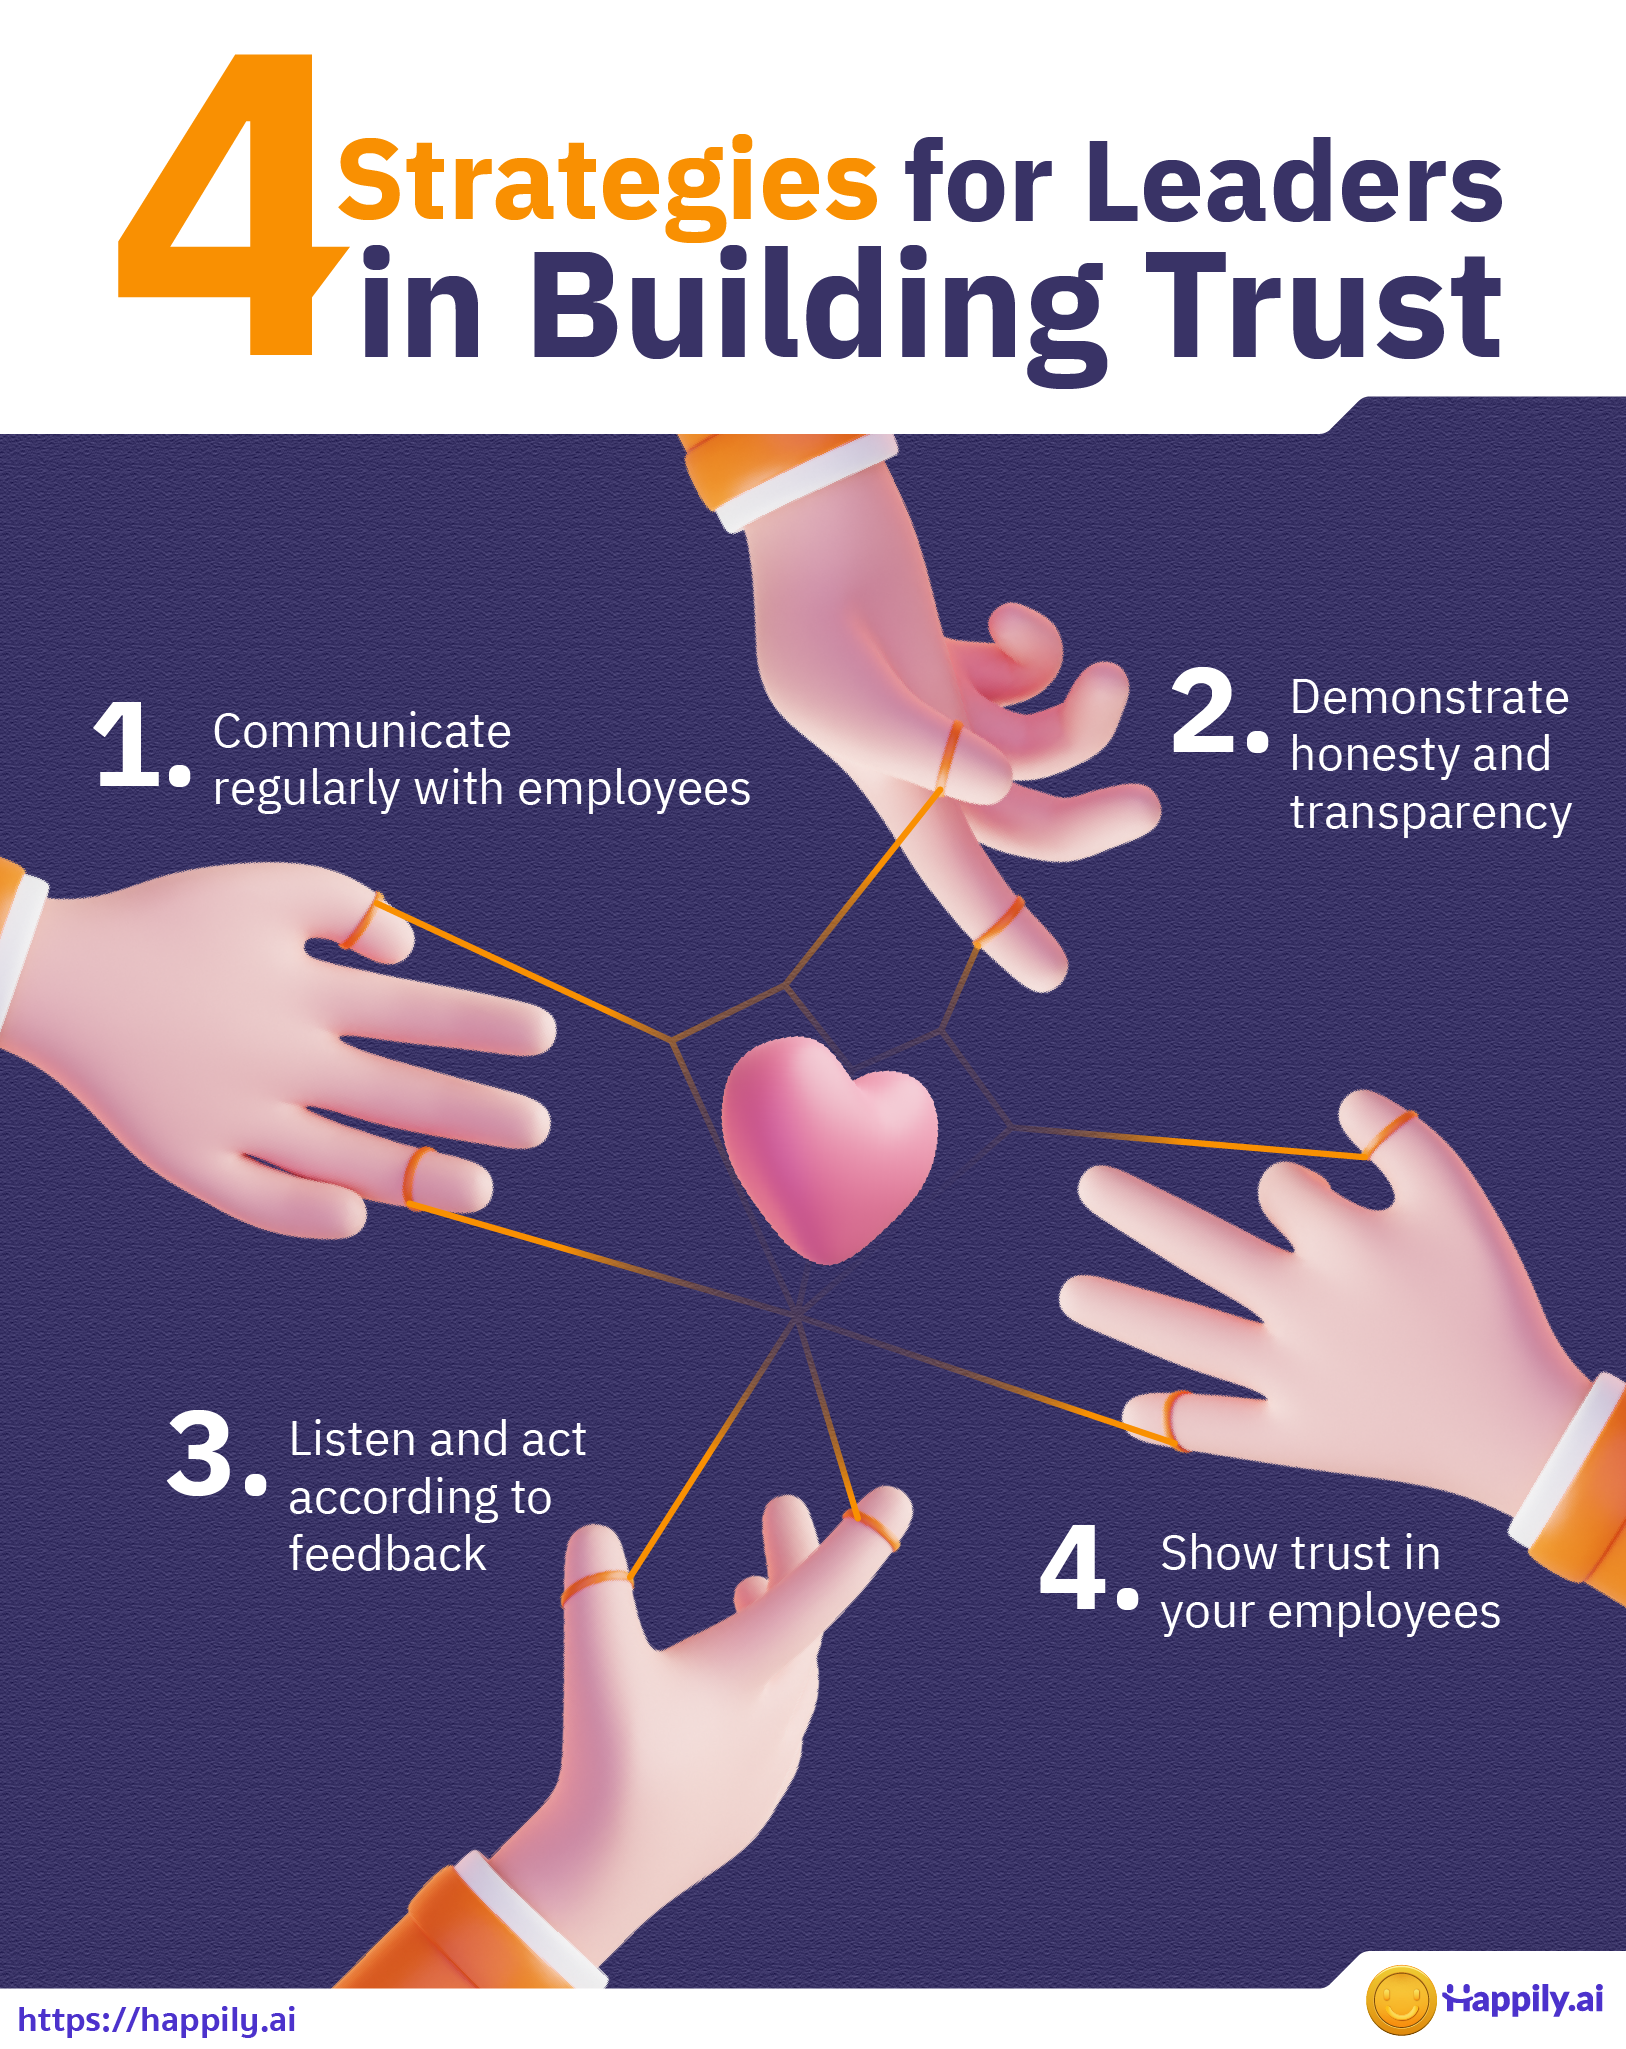 4 strategies for leaders to build trust in the workplace